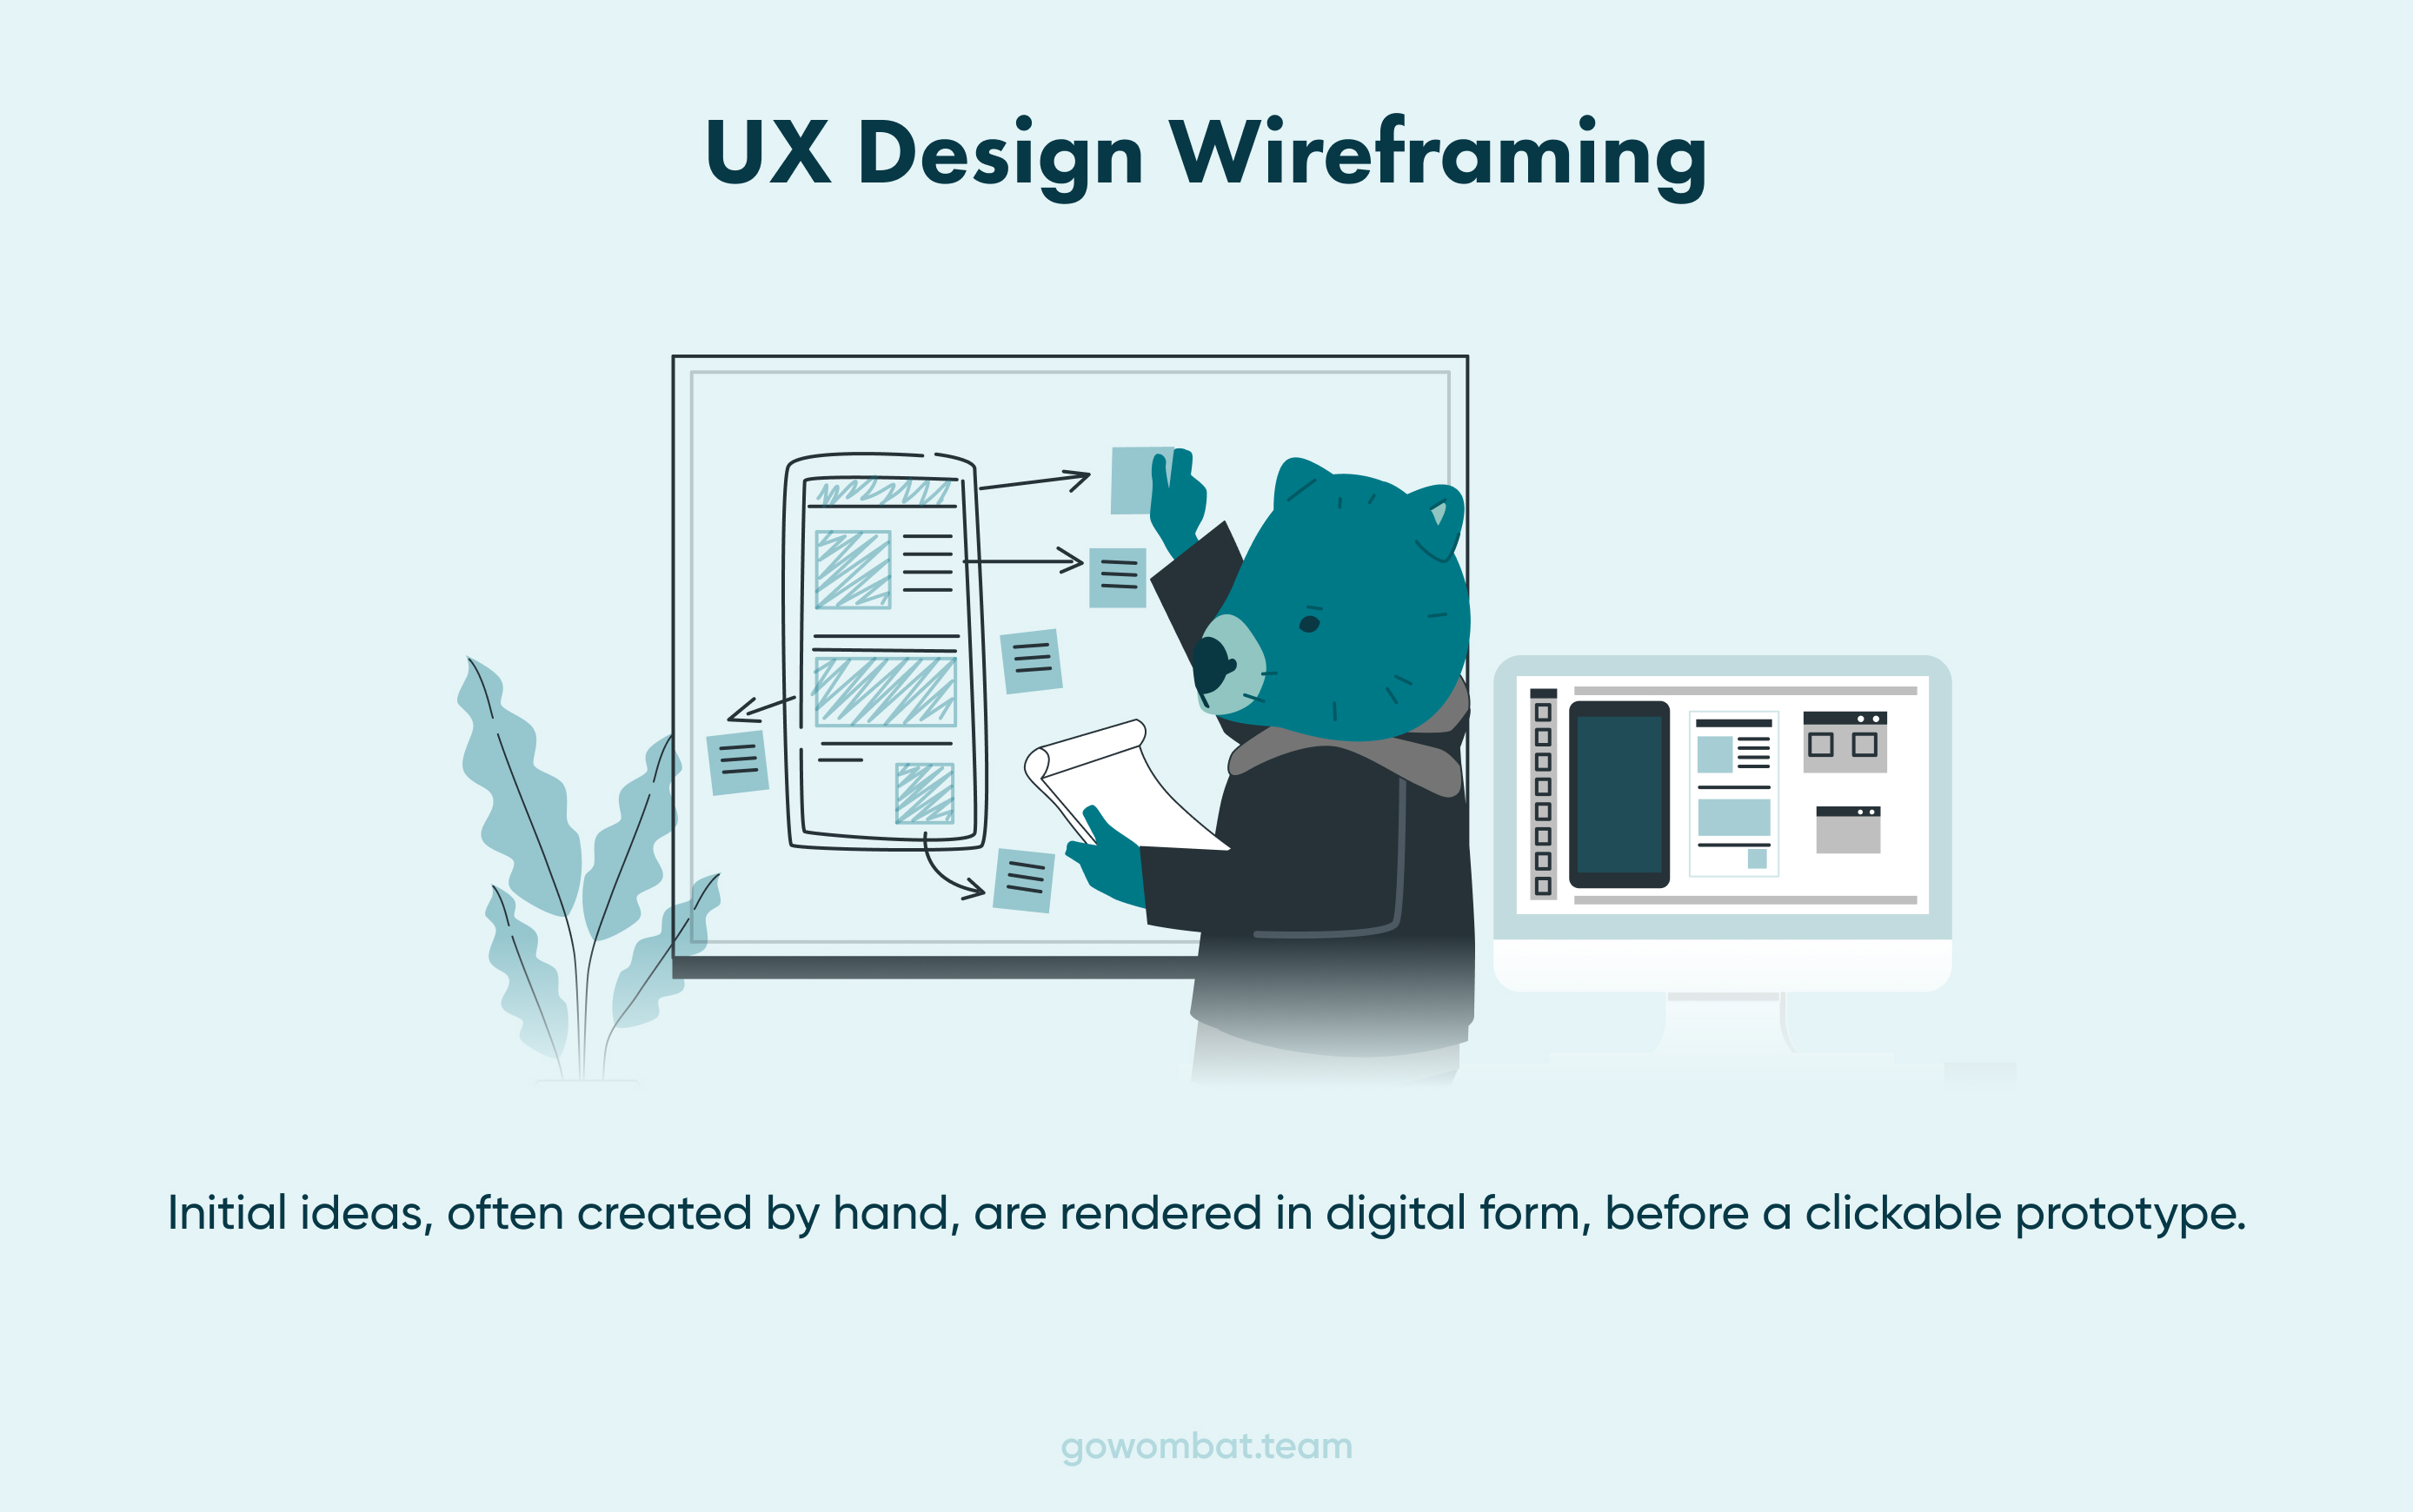 An image showing the connection between UX Design Wireframing by hand and digital.